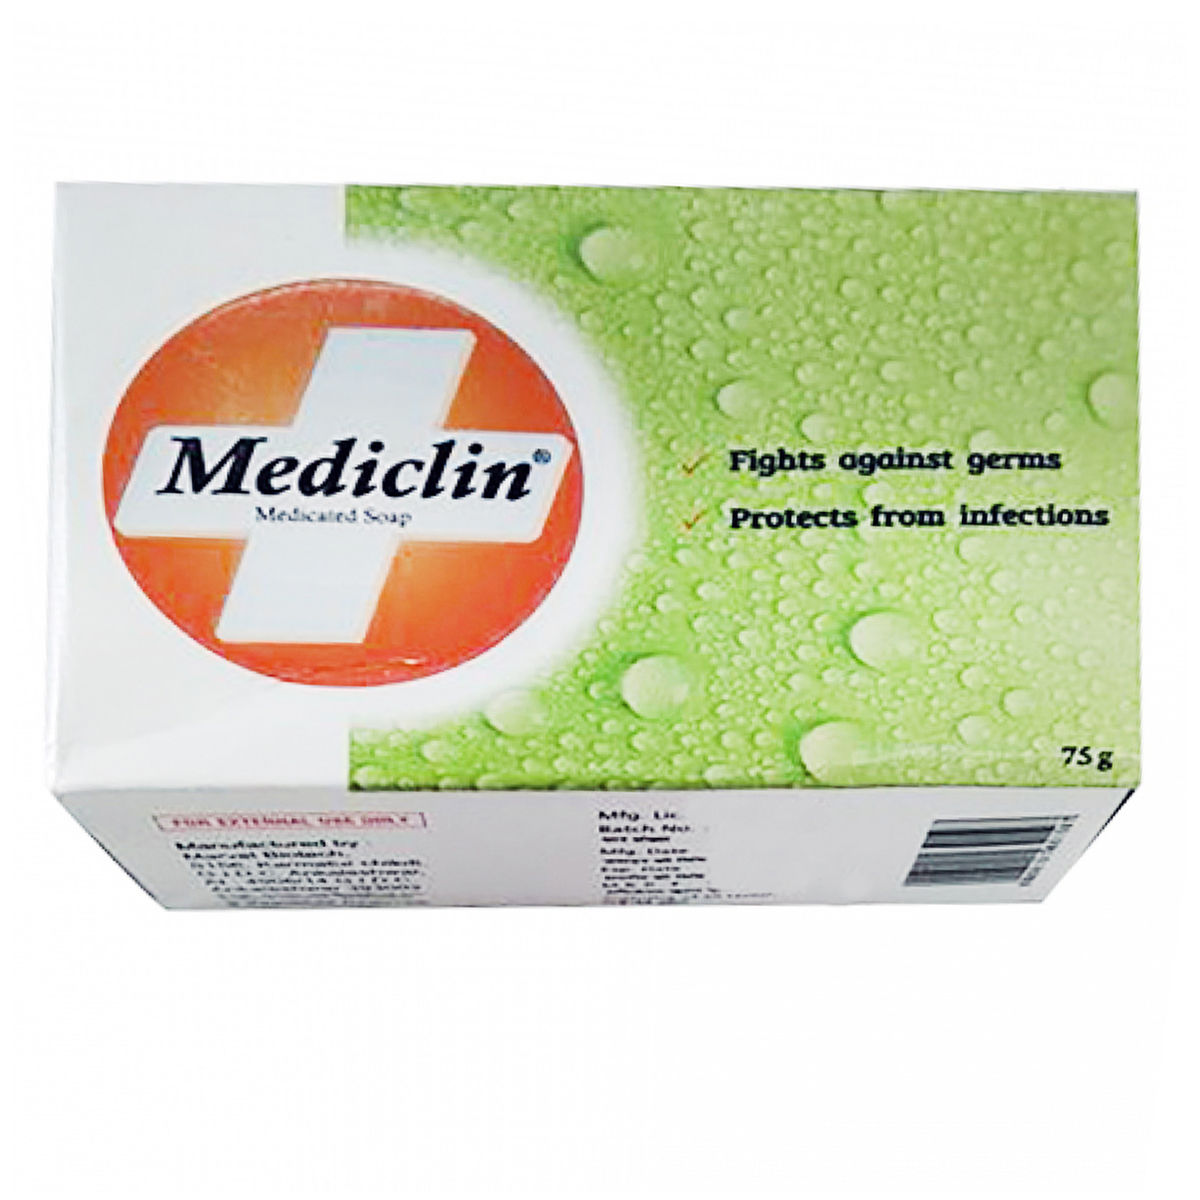 Mediclin Soap, 75 gm, Pack of 1 